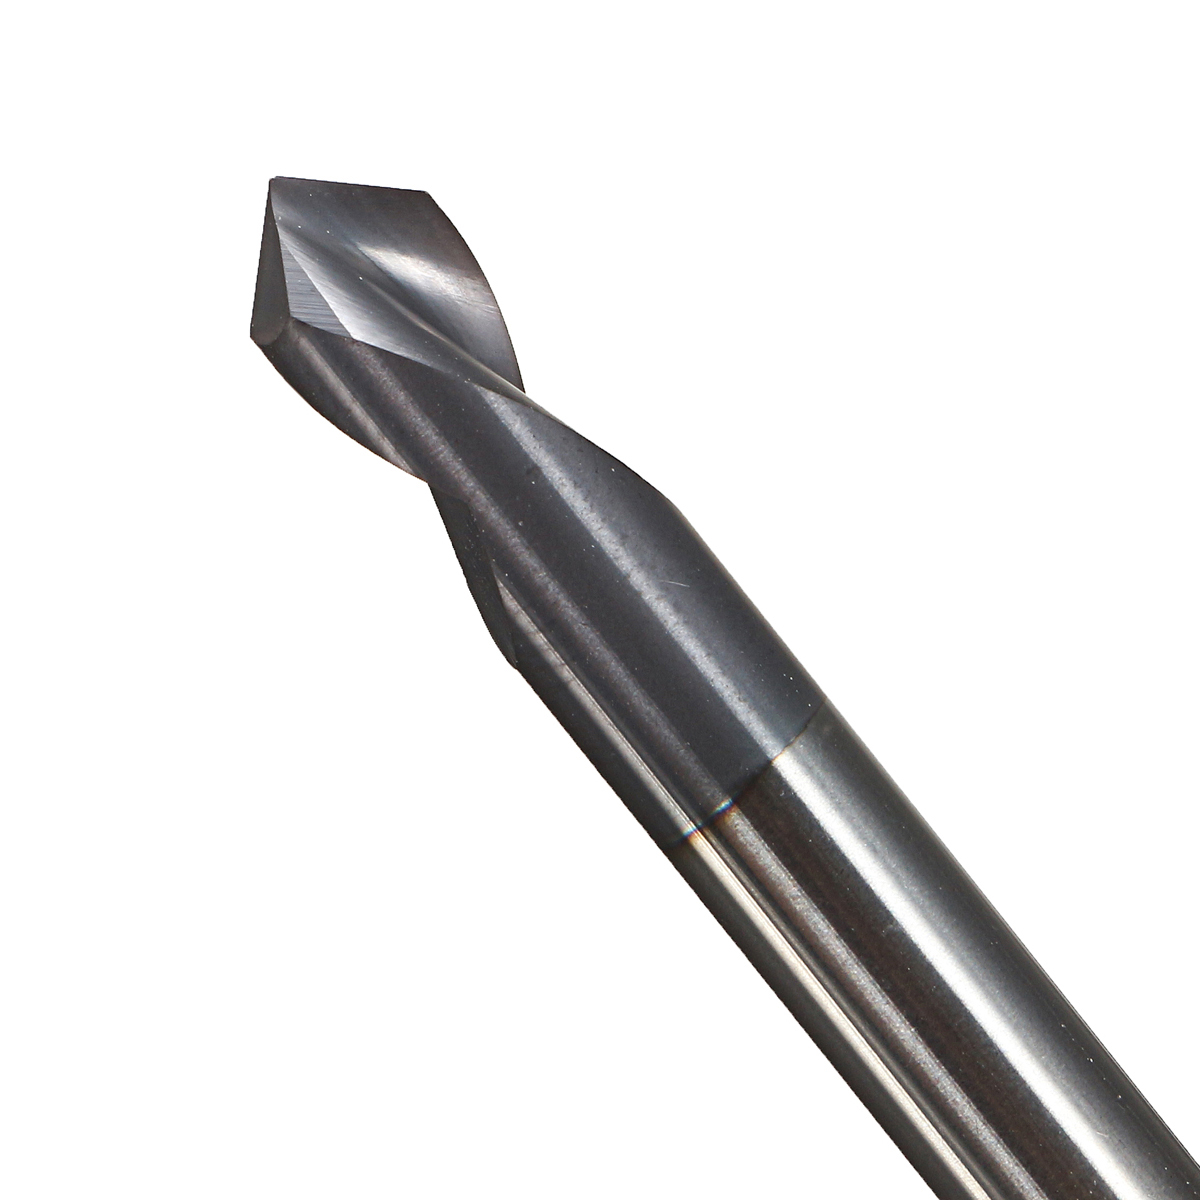 Drillpro-2-Flutes-6mm-Carbide-Chamfer-Mill-90-Degree-HRC45-Milling-Cutter-1108522-7